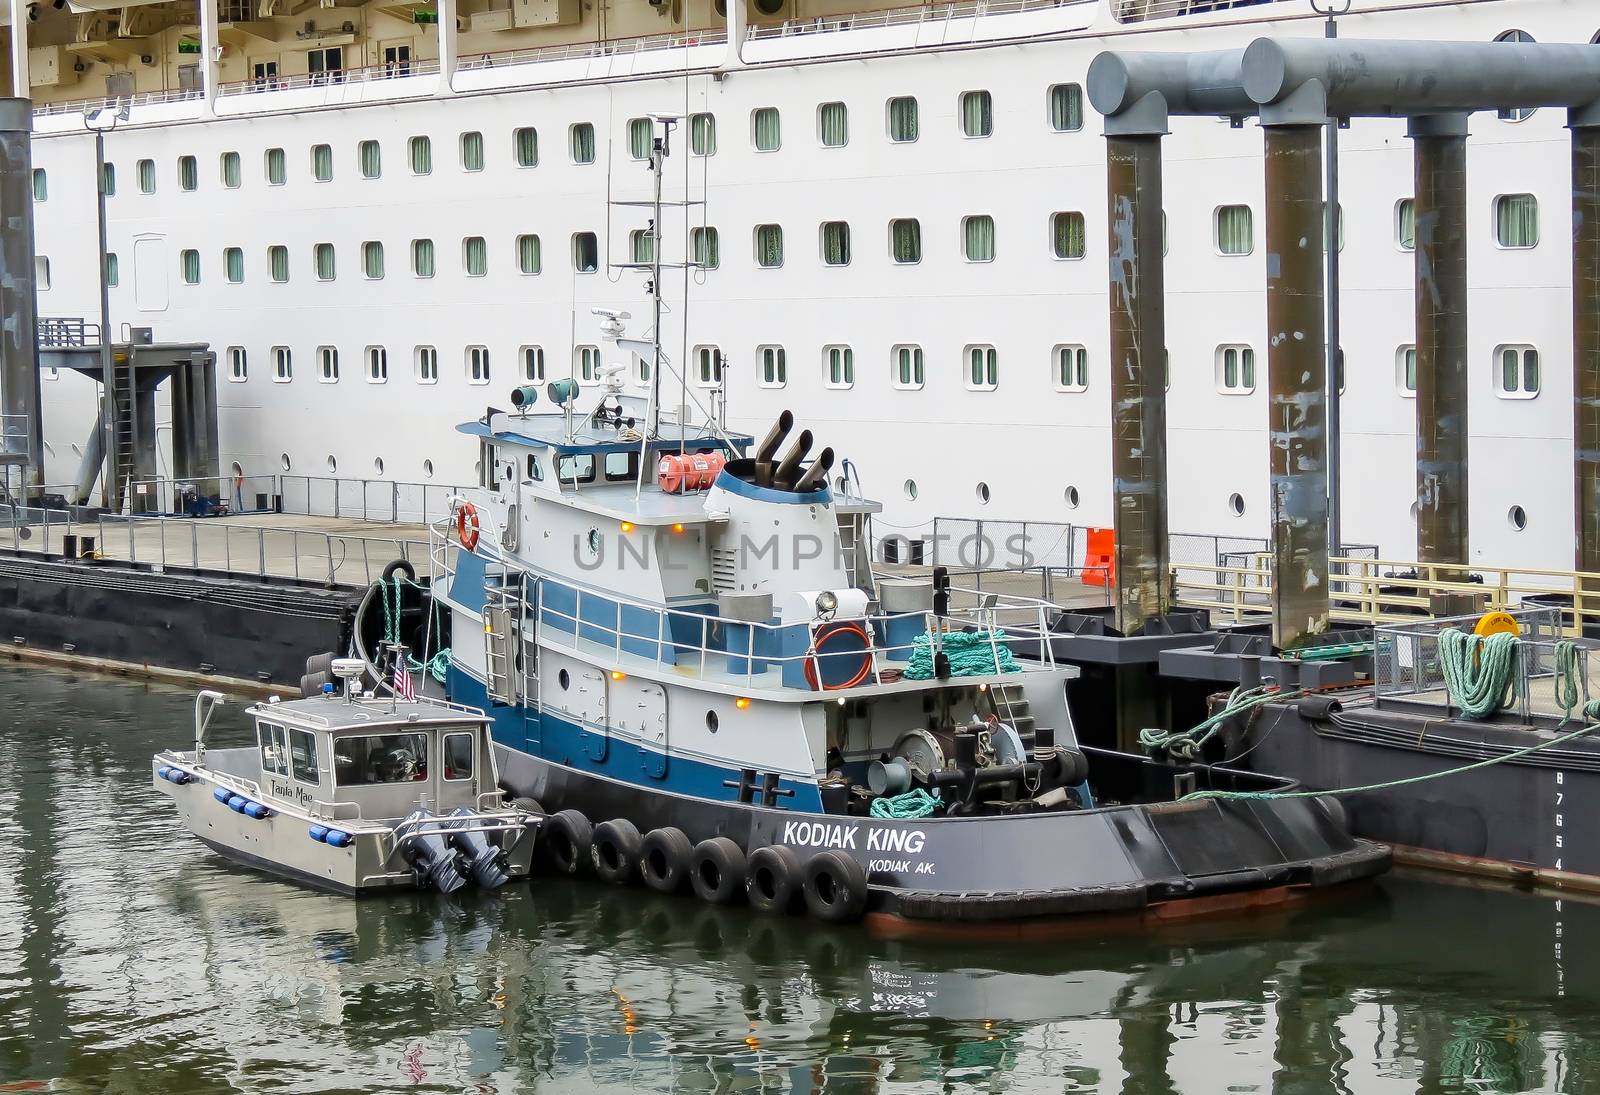 Juneau, Alaska, USA- June 17, 2012: A tugboat named "Kodiak King" sits along side a cruise ship after helping the large boat navigate and dock in the harbor in this popular tourist location in the summer.